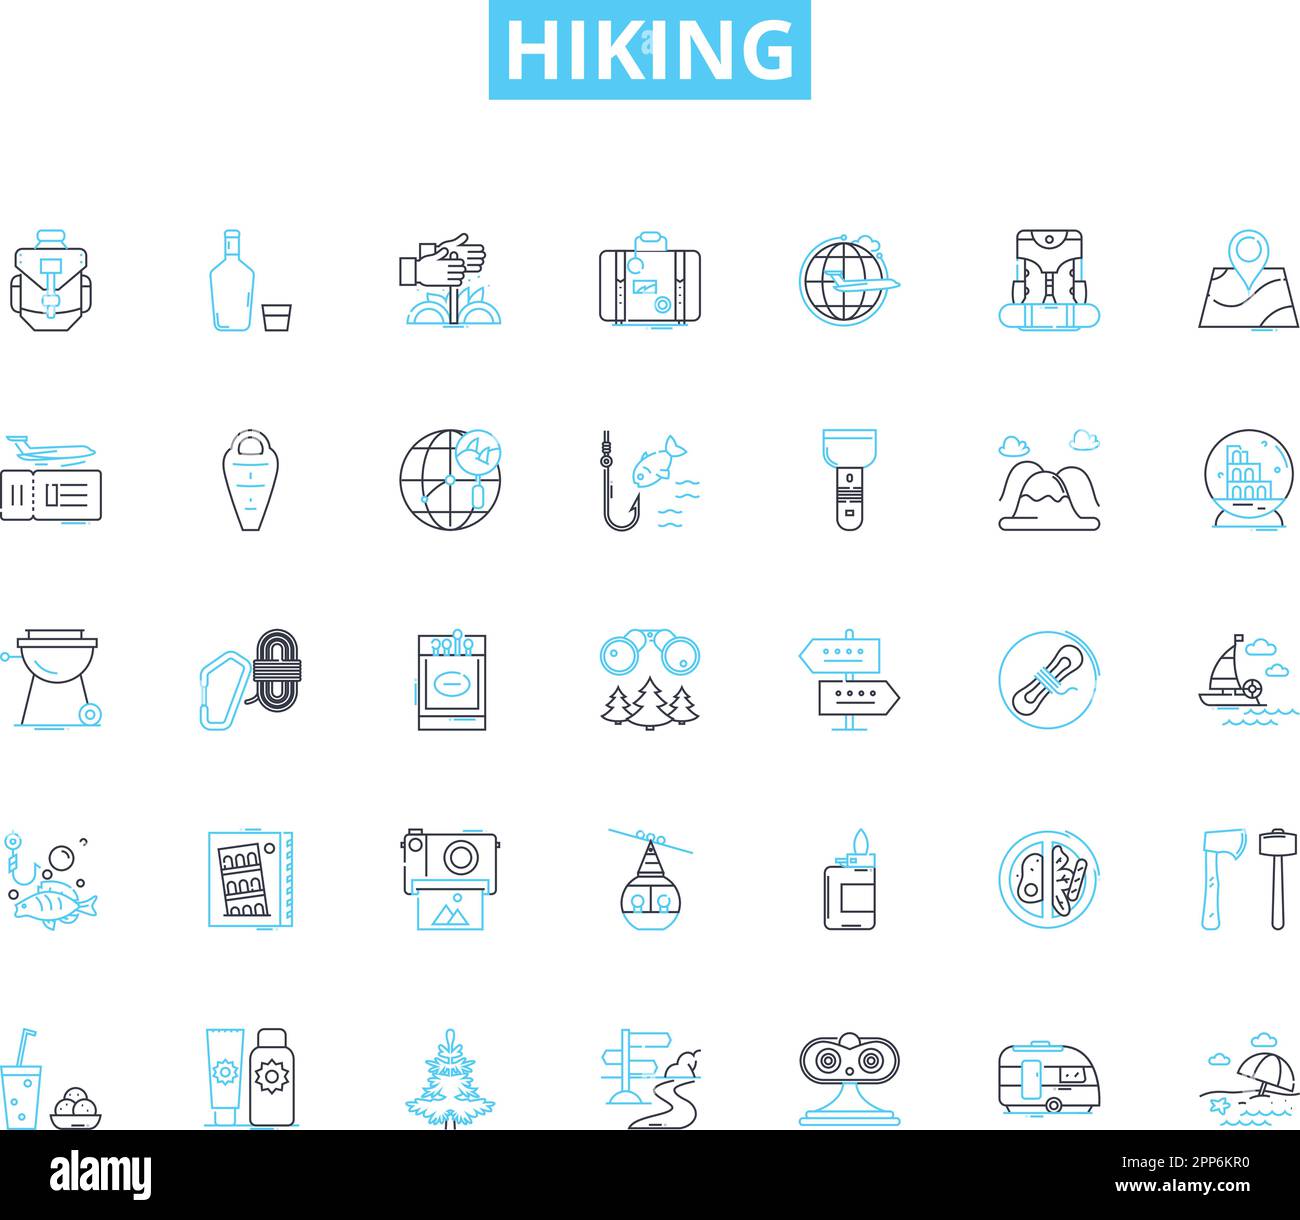 Hiking linear icons set. Trail, Summit, Scramble, Backpack, Trek, Waterfall, Breath-taking line vector and concept signs. Adventure,Explore,Wilderness Stock Vector